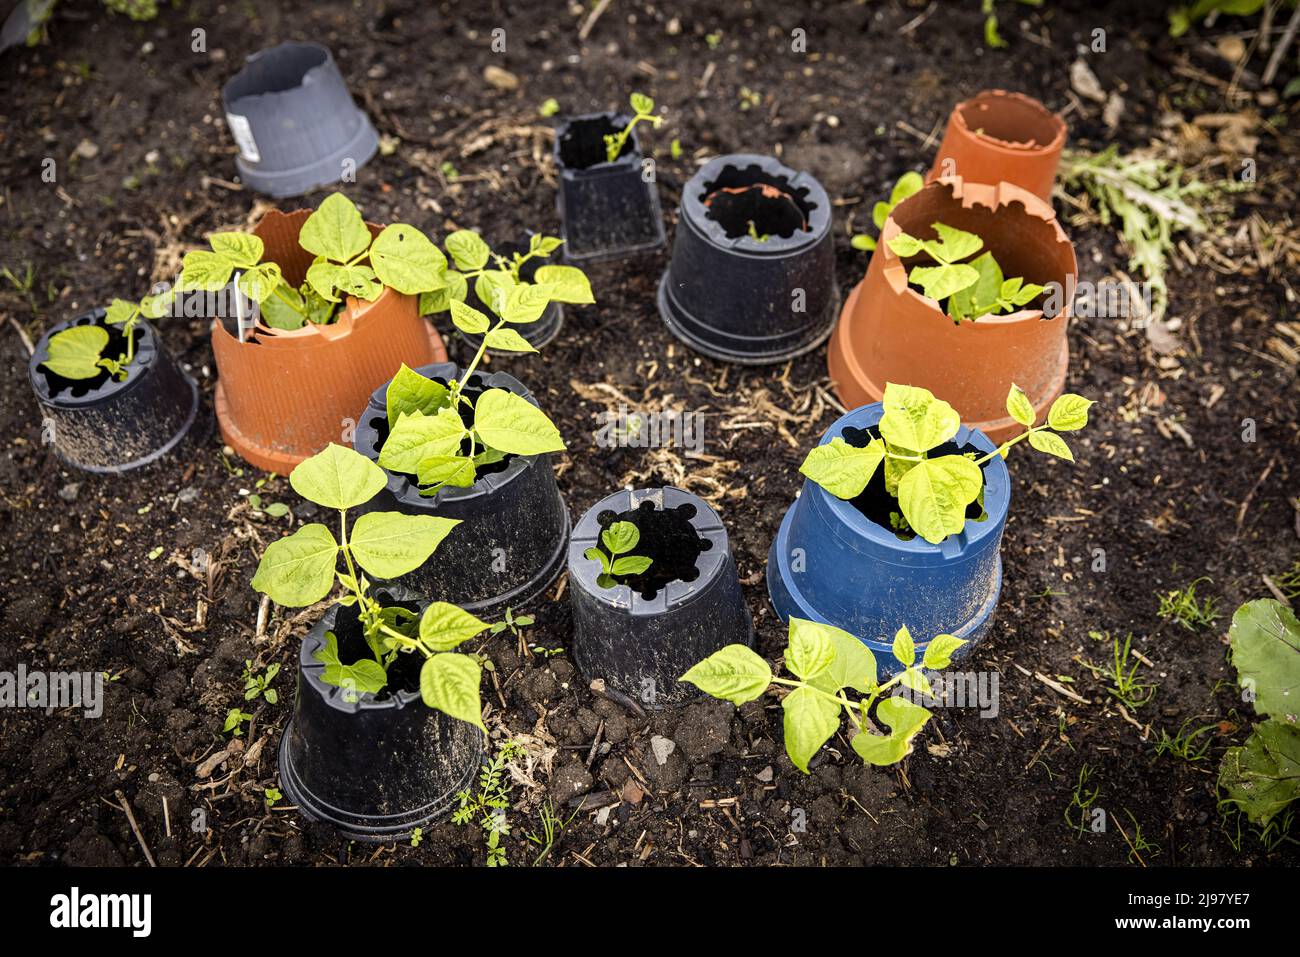 2022-05-21 12:56:04 UTRECHT - People grow their own vegetables in their vegetable garden on a plot of land at the Koningshof urban agriculture initiative. ANP RAMON VAN FLYMEN netherlands out - belgium out Stock Photo